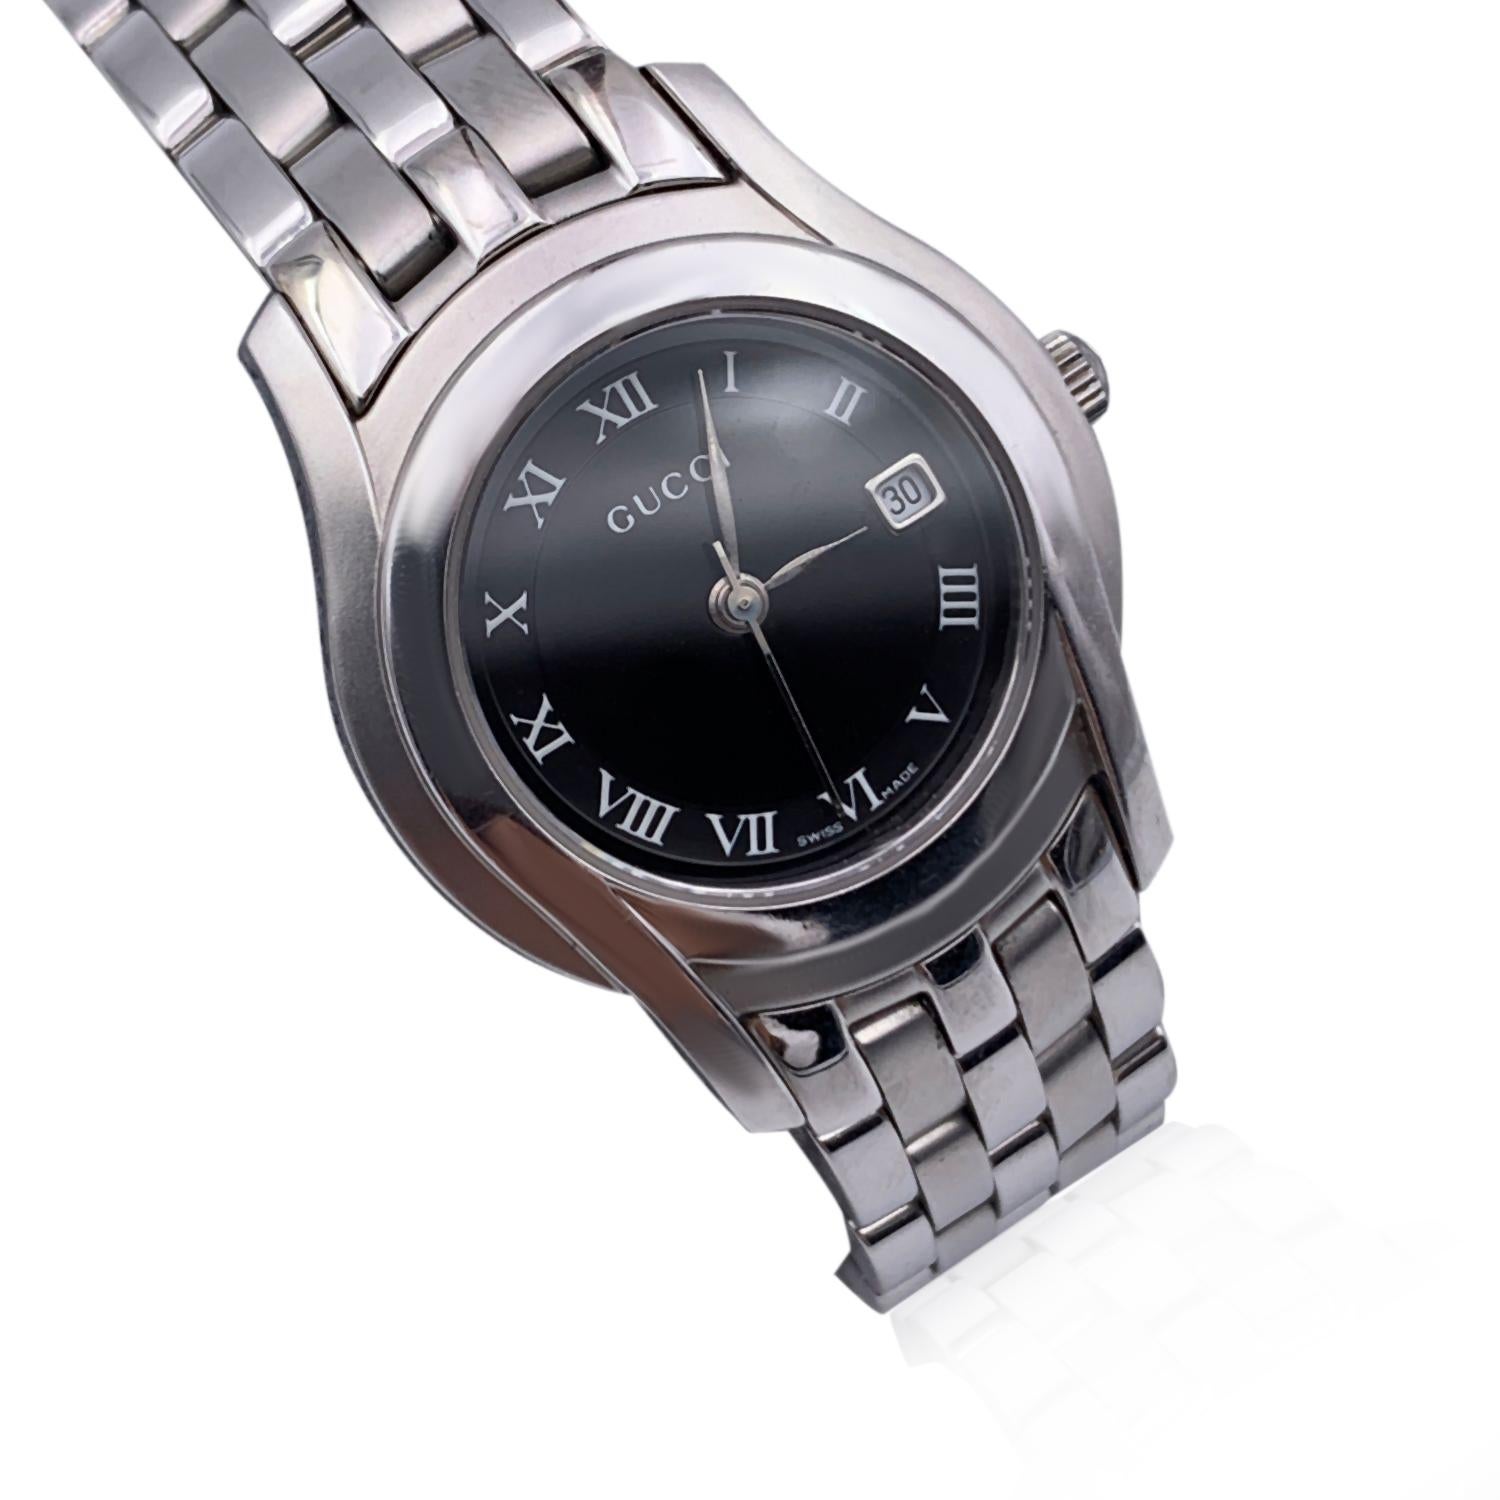 Gucci silver tone stainless steel wrist watch, mod. 5500 L. Black Dial. Date at 3 o'clock. Sapphire crystal. Swiss Made Quartz movement. Gucci written on face. Roman numbers. Gucci crest on the reverse of the case. Water Resistant to 3atm. Stainless